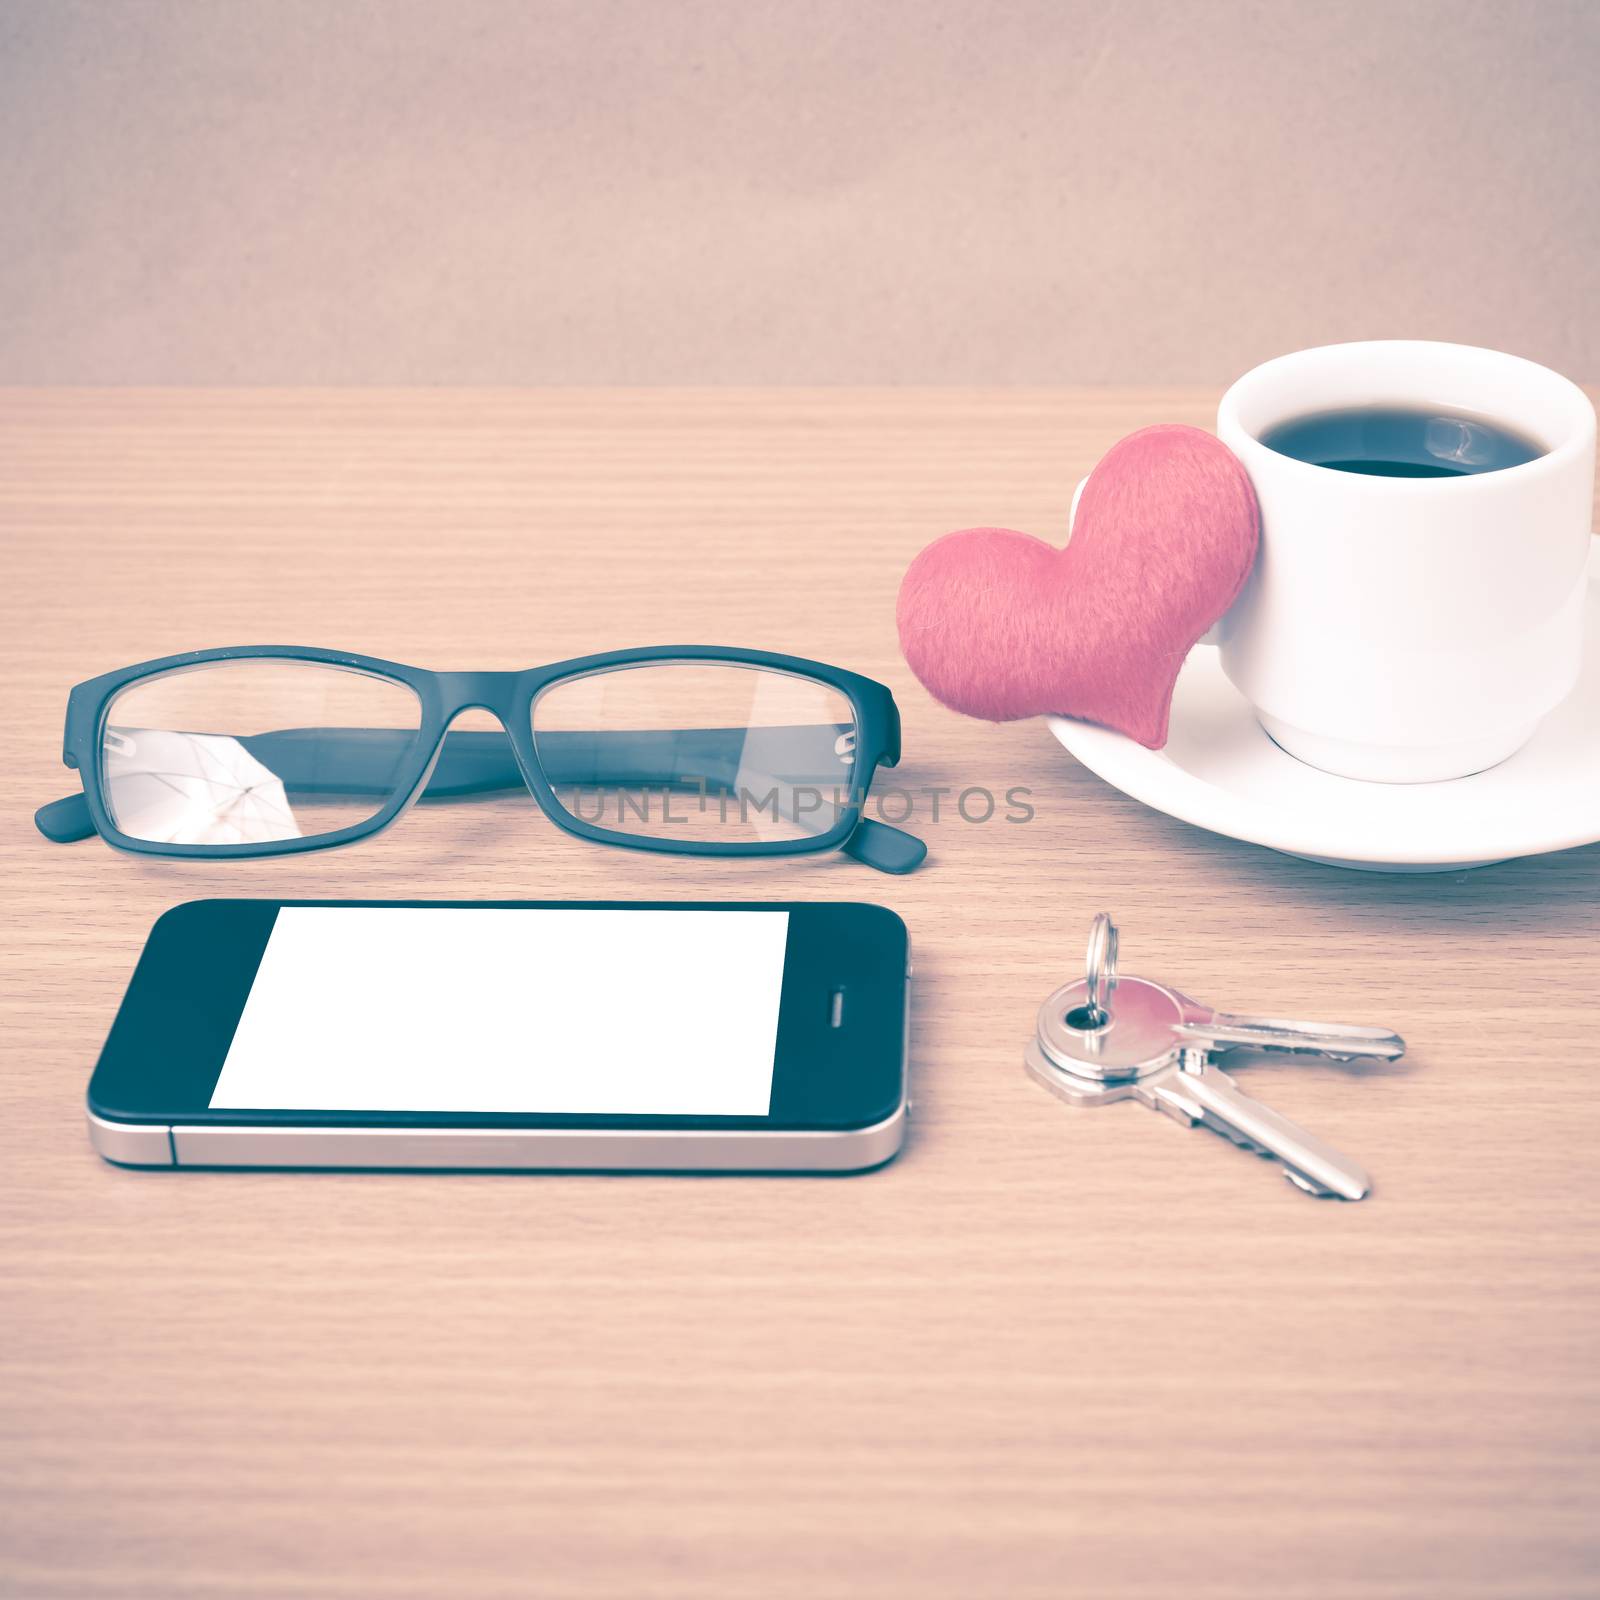 coffee,phone,eyeglasses,key and heart on wood table background vintage style